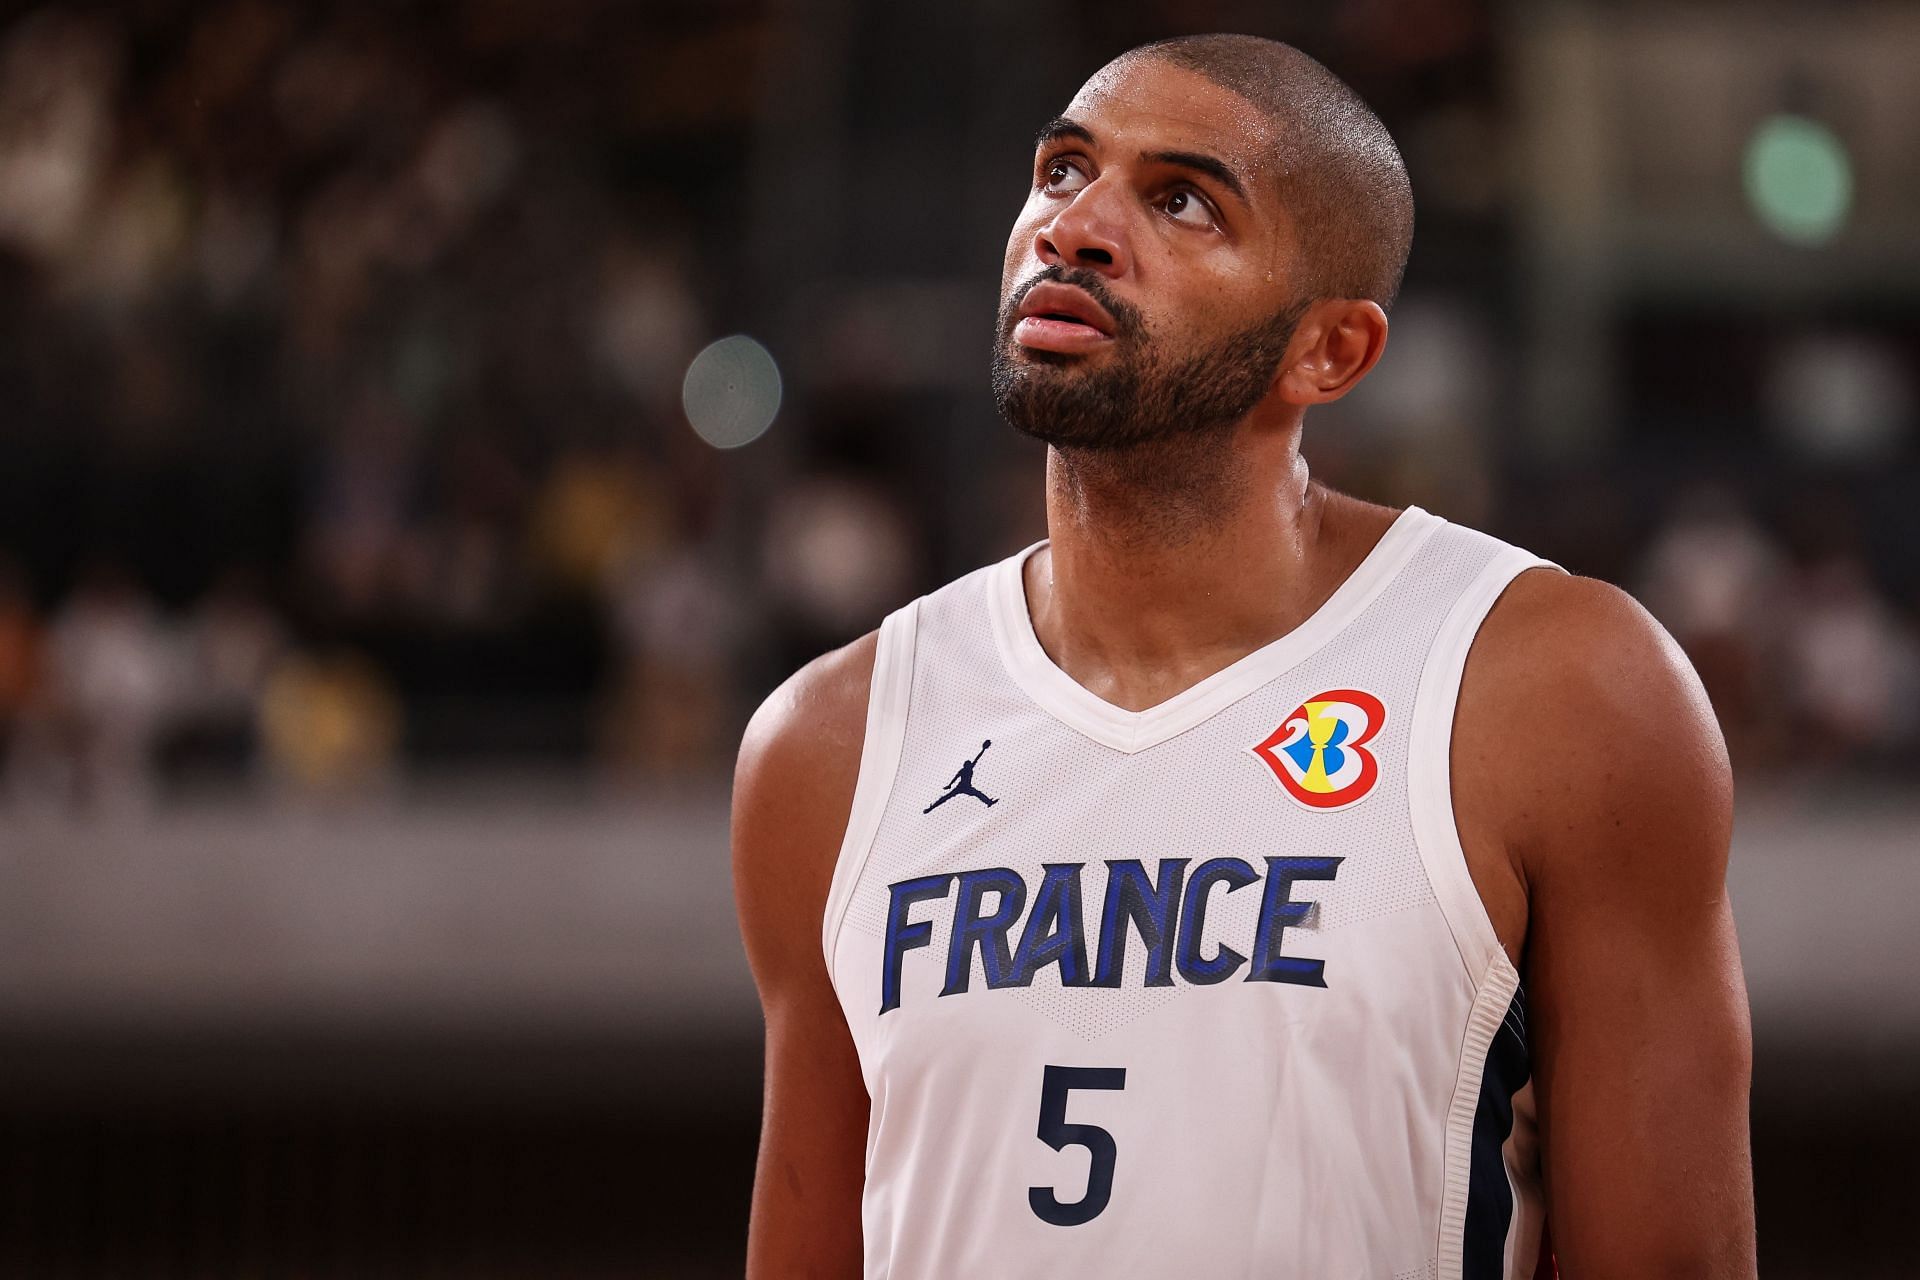 Nicolas Batum and France failed to make it out of the group stage in the FIBA World Cup